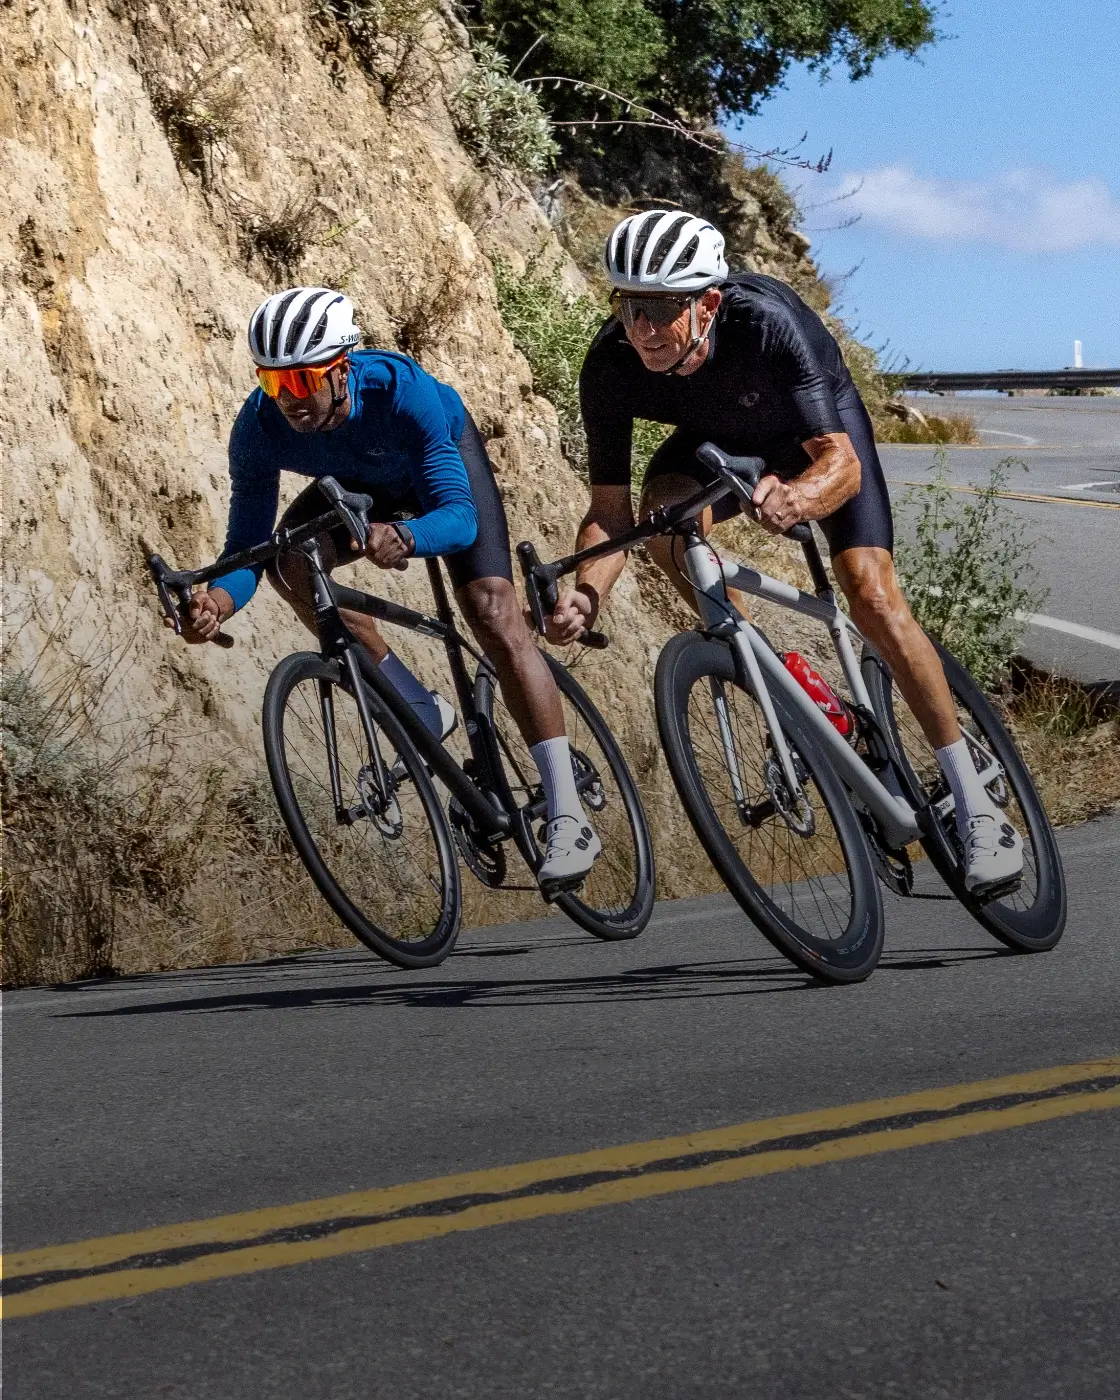 Two male road cyclist riding down a road wearing PEARL iZUMi's new Attack apparel